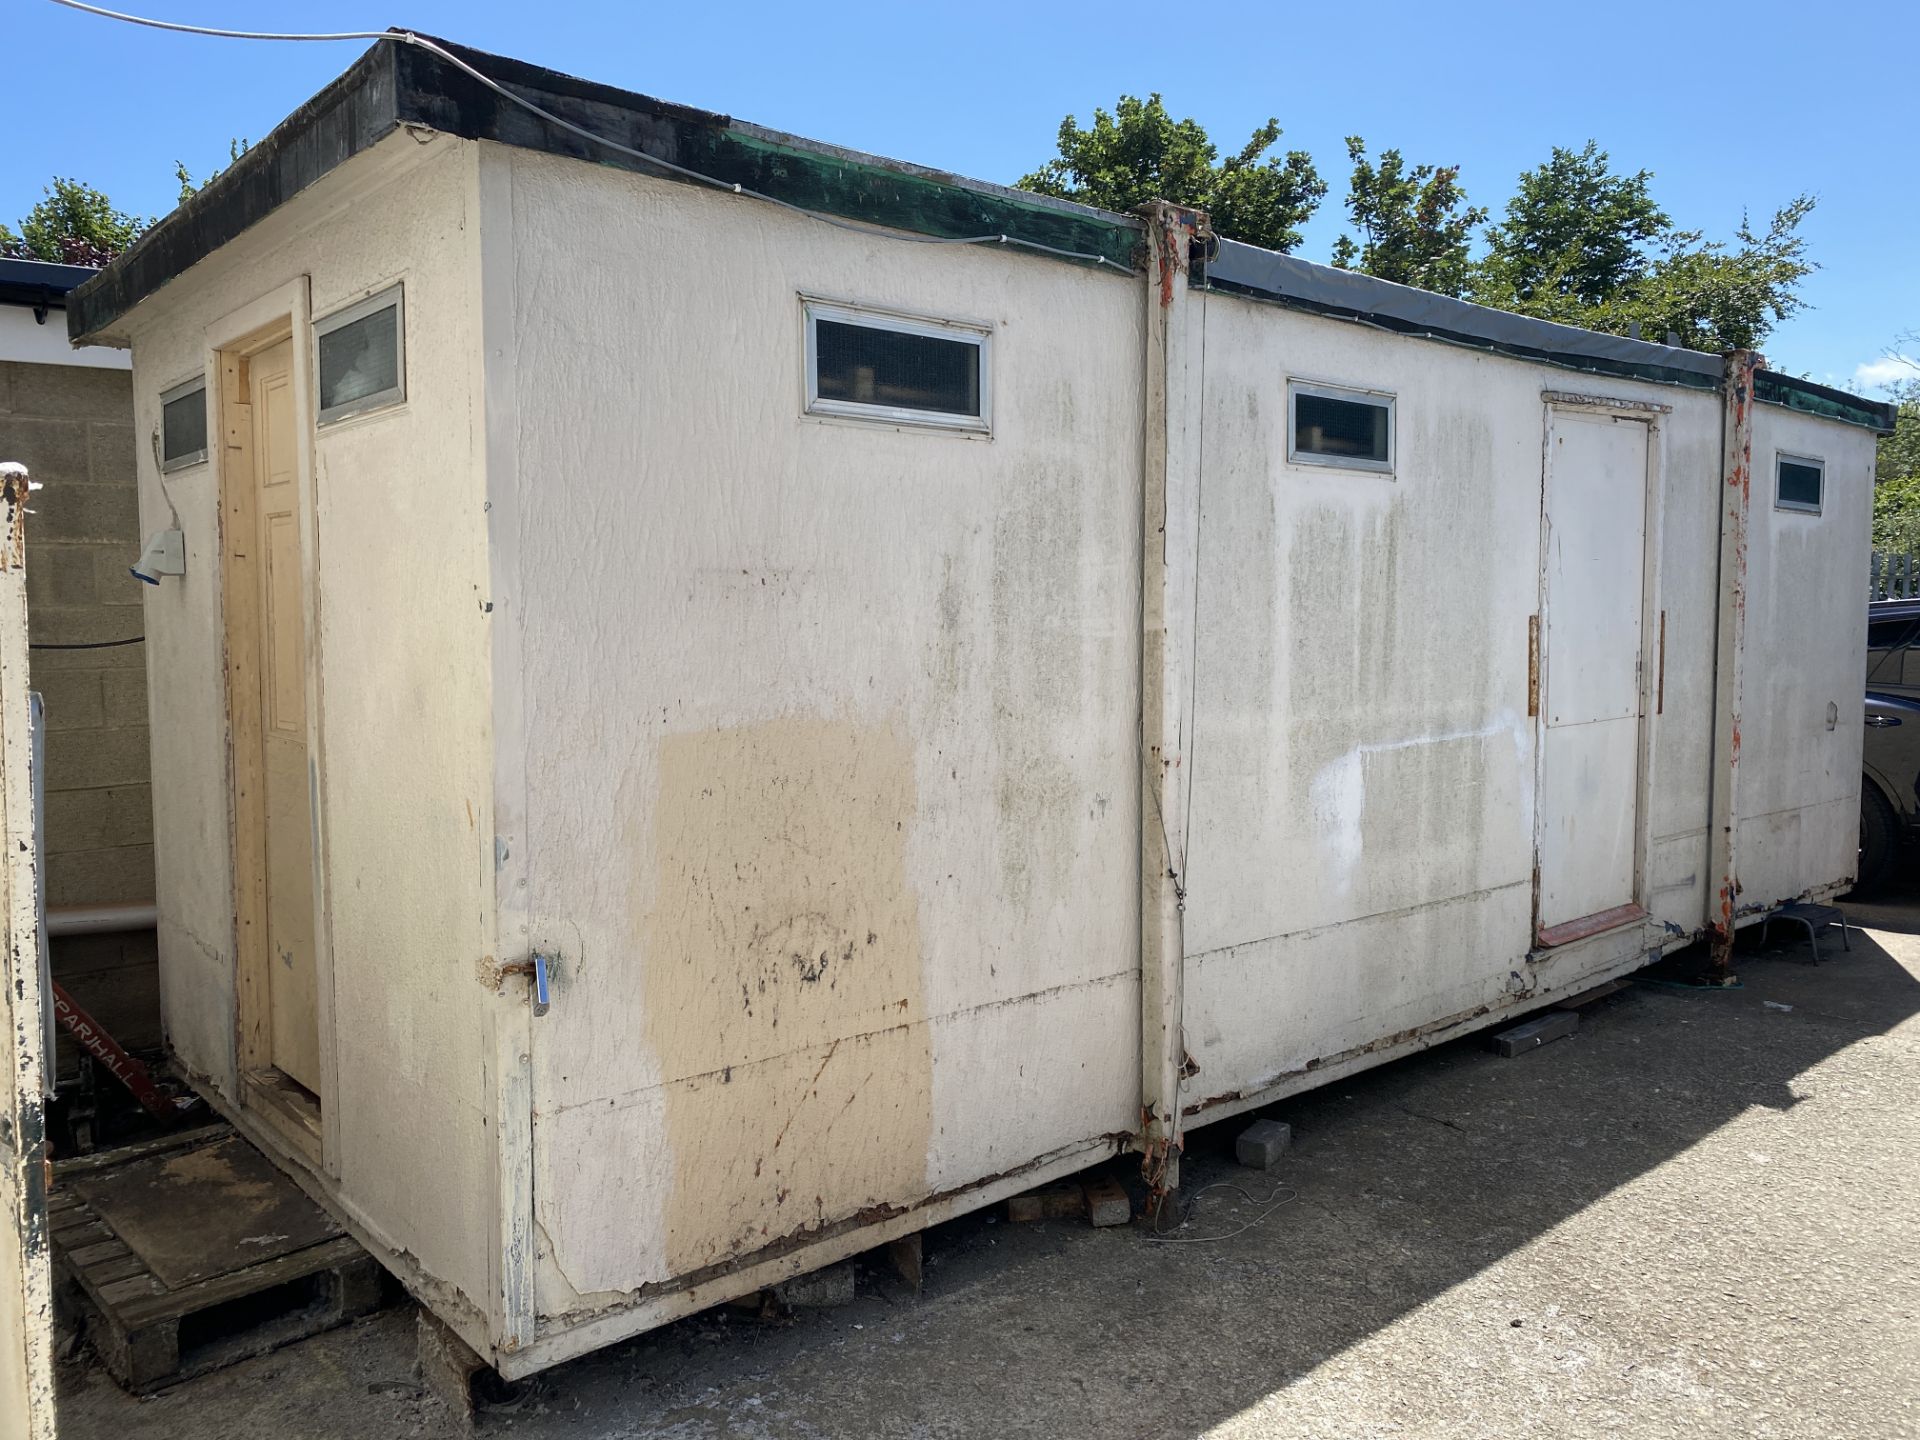 Site Storage/Drying Room - Approximately 24' x 8' mobile building racked out with wooden drying